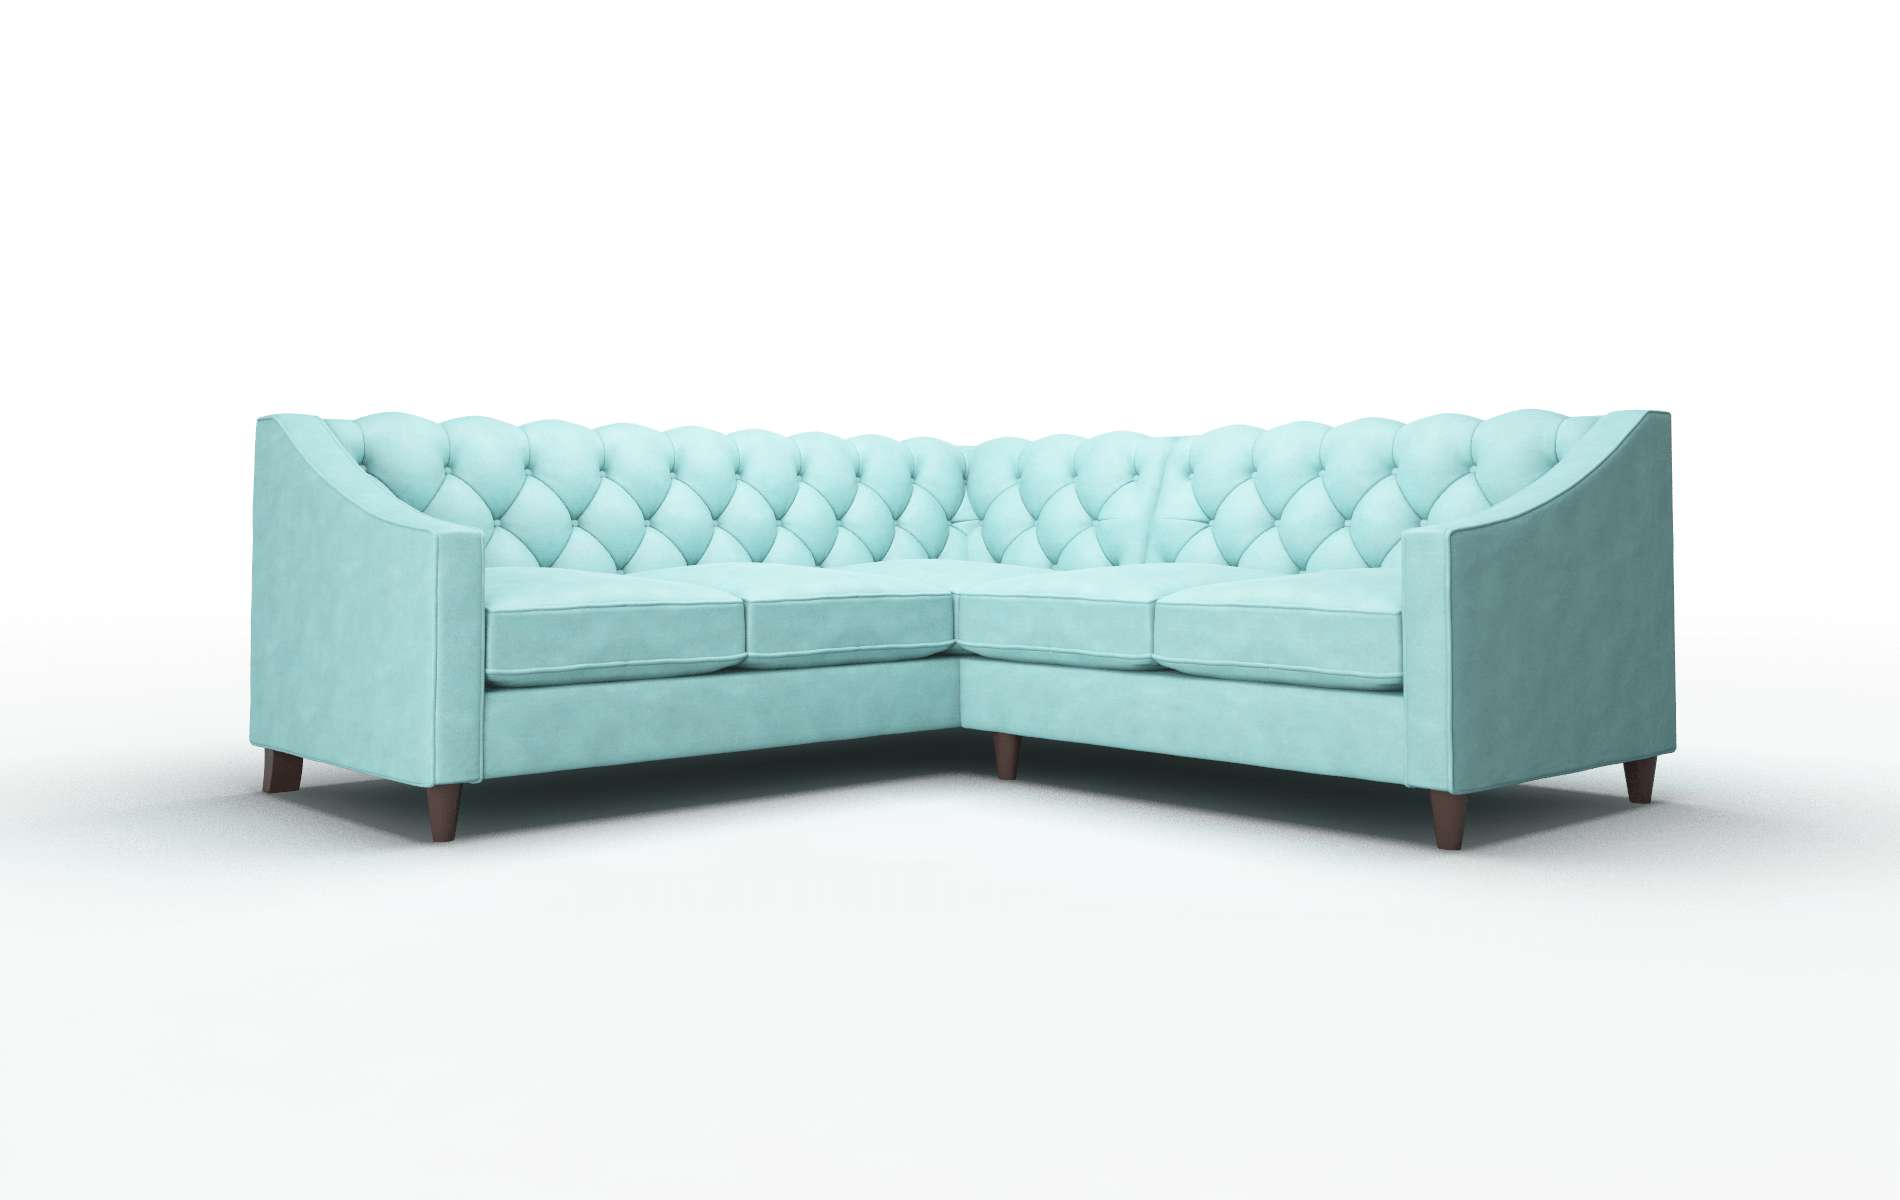 Manchester Curious Turquoise chair espresso legs